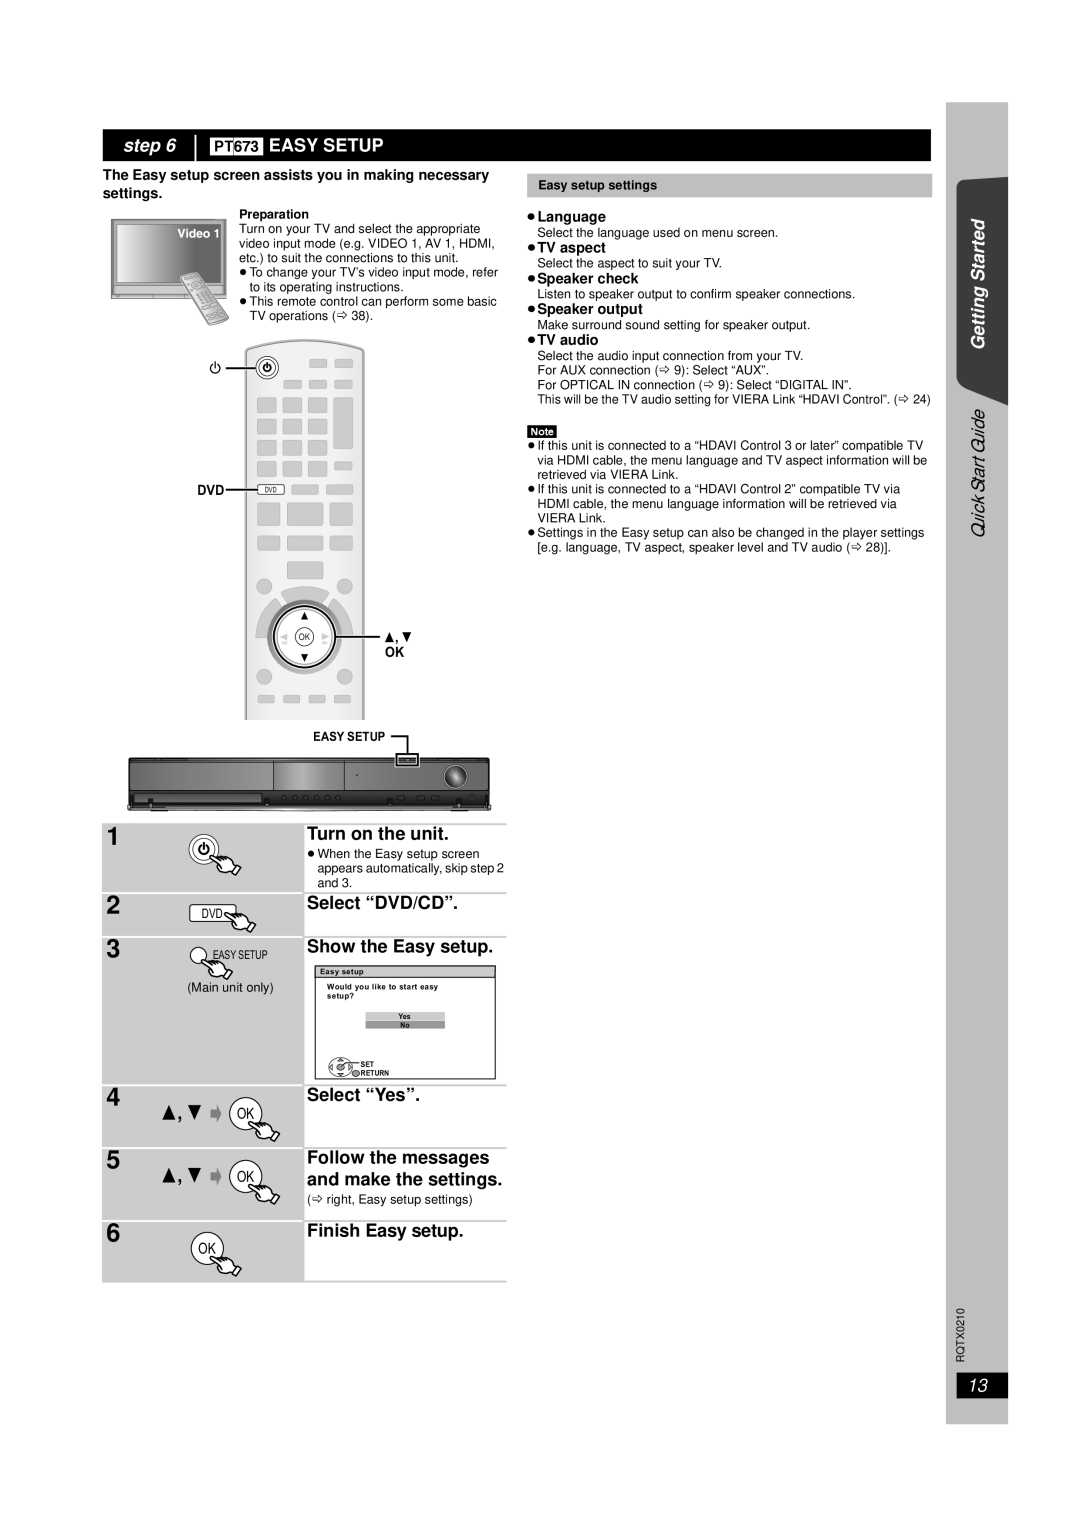 Panasonic SC-PT673 manual 1 2 3 4 5 6, PT673 EASY SETUP, Quick Start Guide Getting Started, Turn on the unit, Select “Yes” 